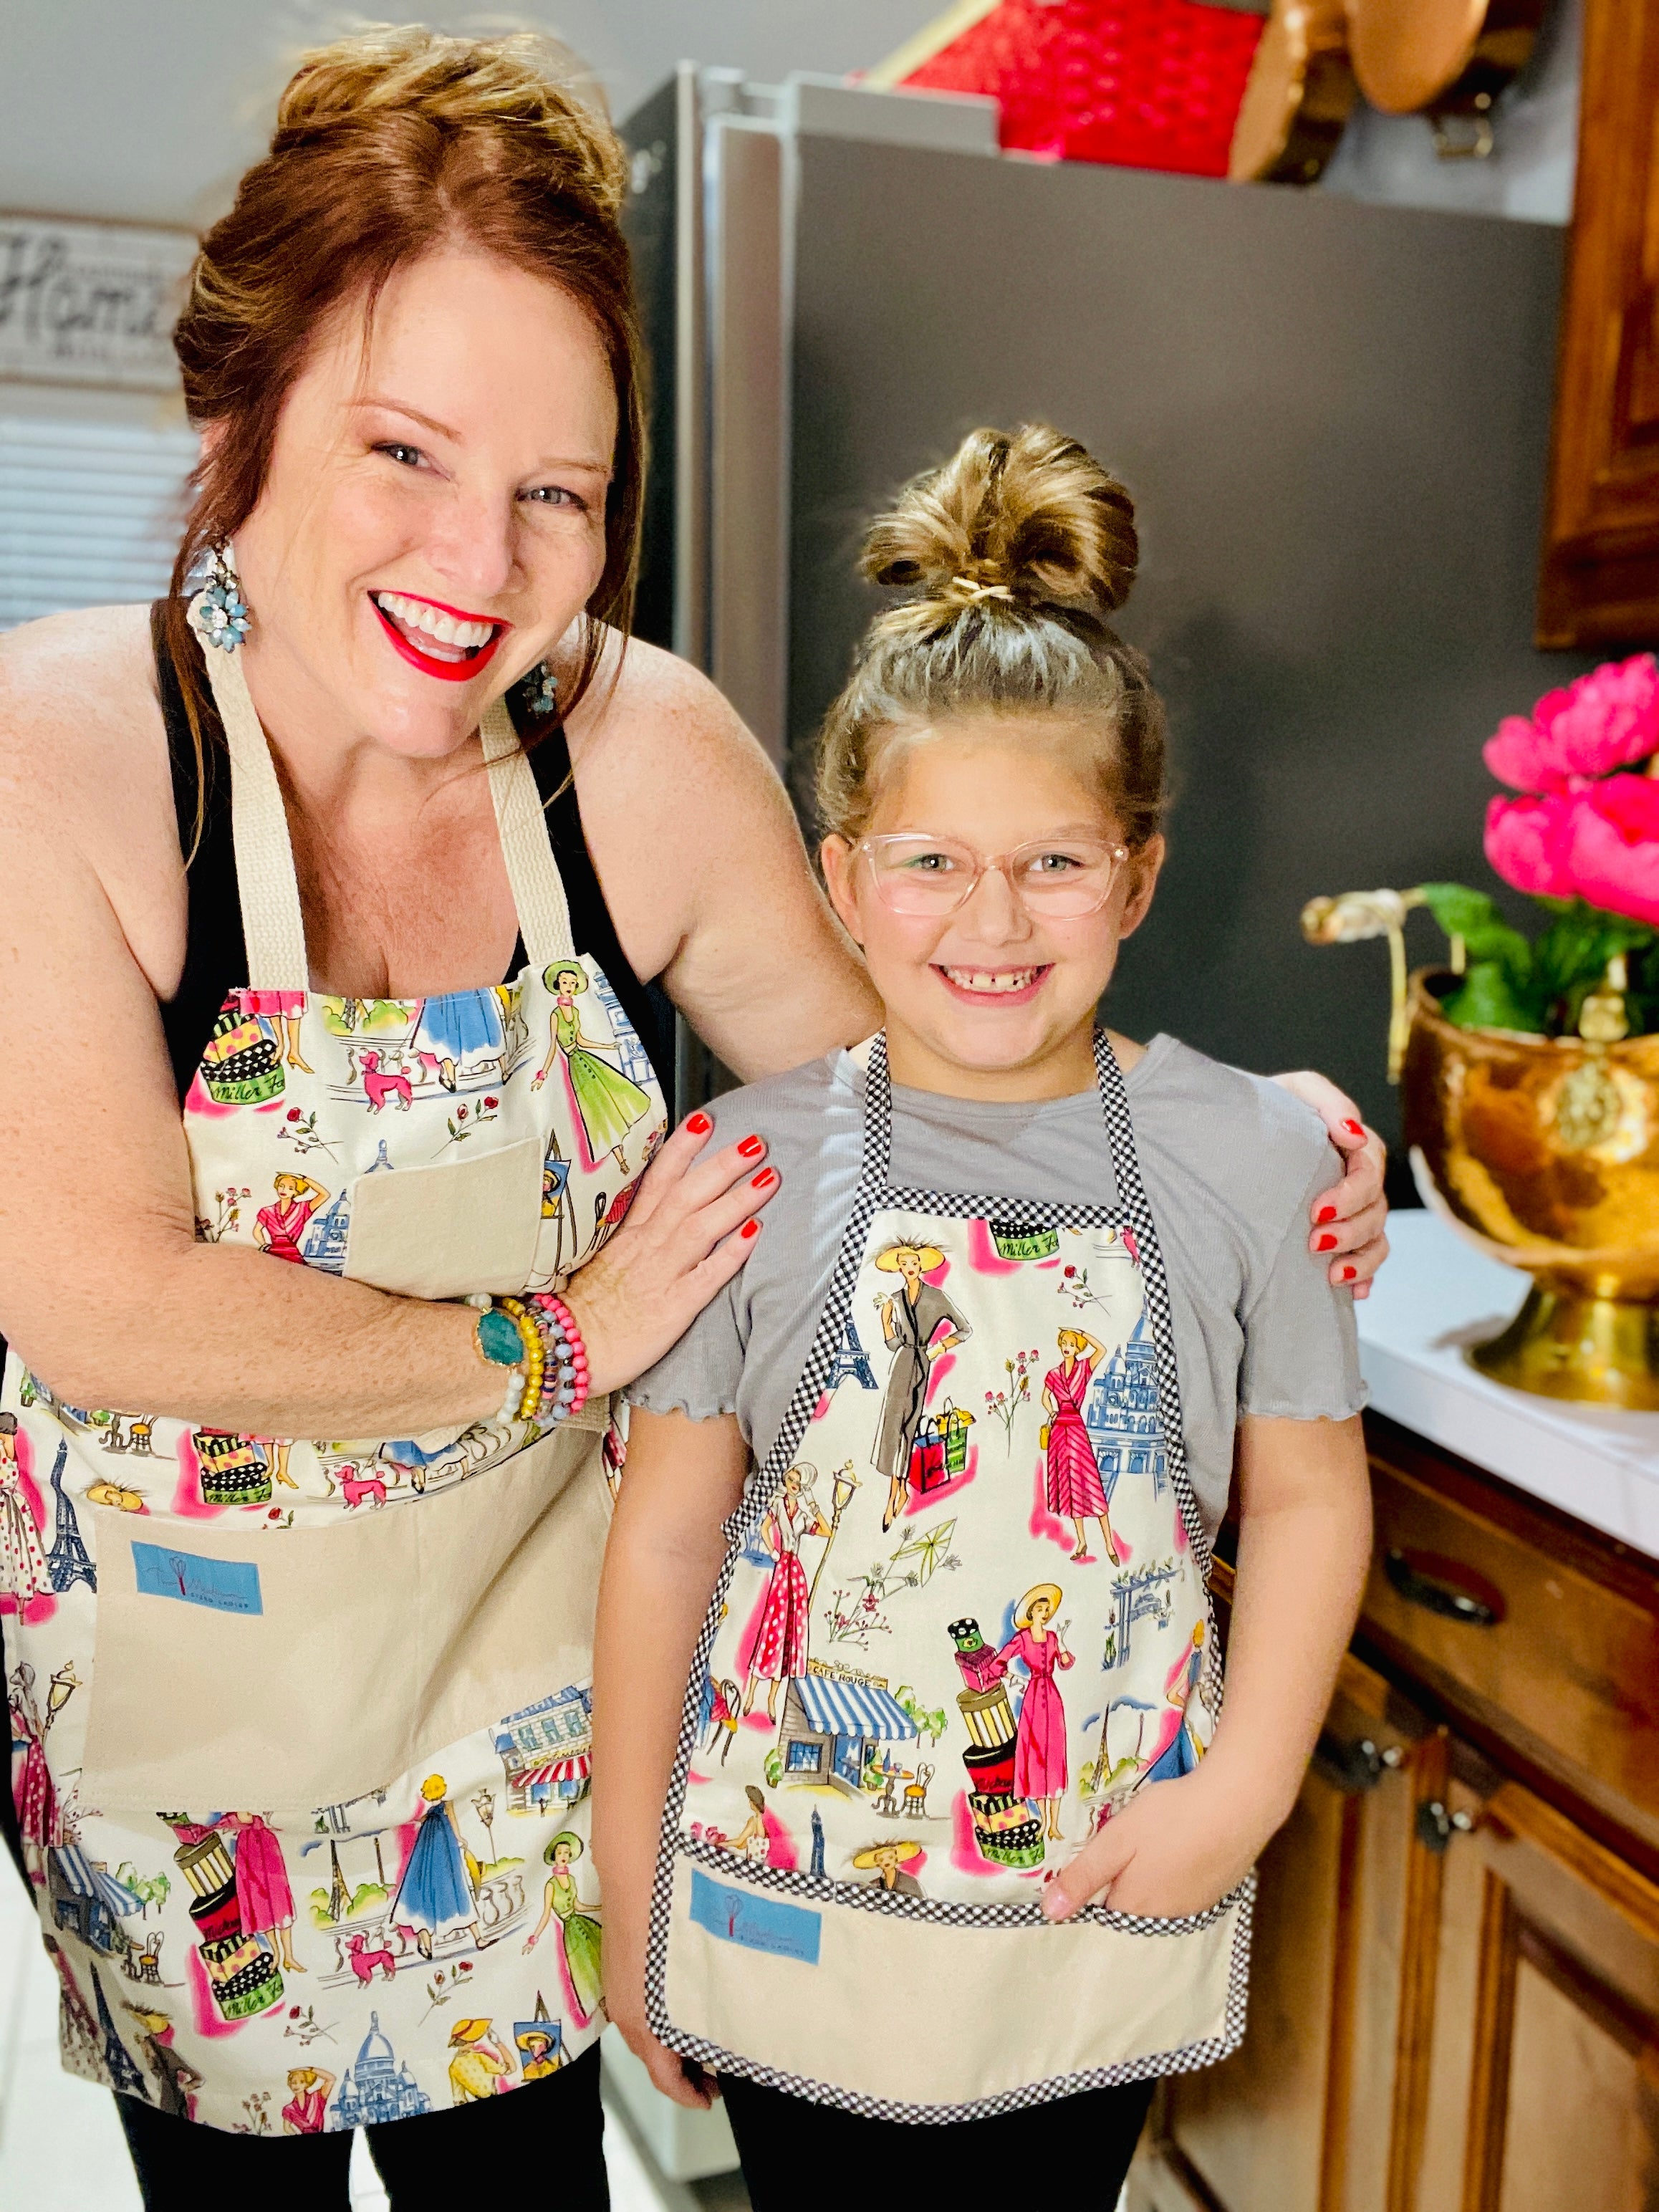 Mommy and Me Aprons, Matching Apron Set